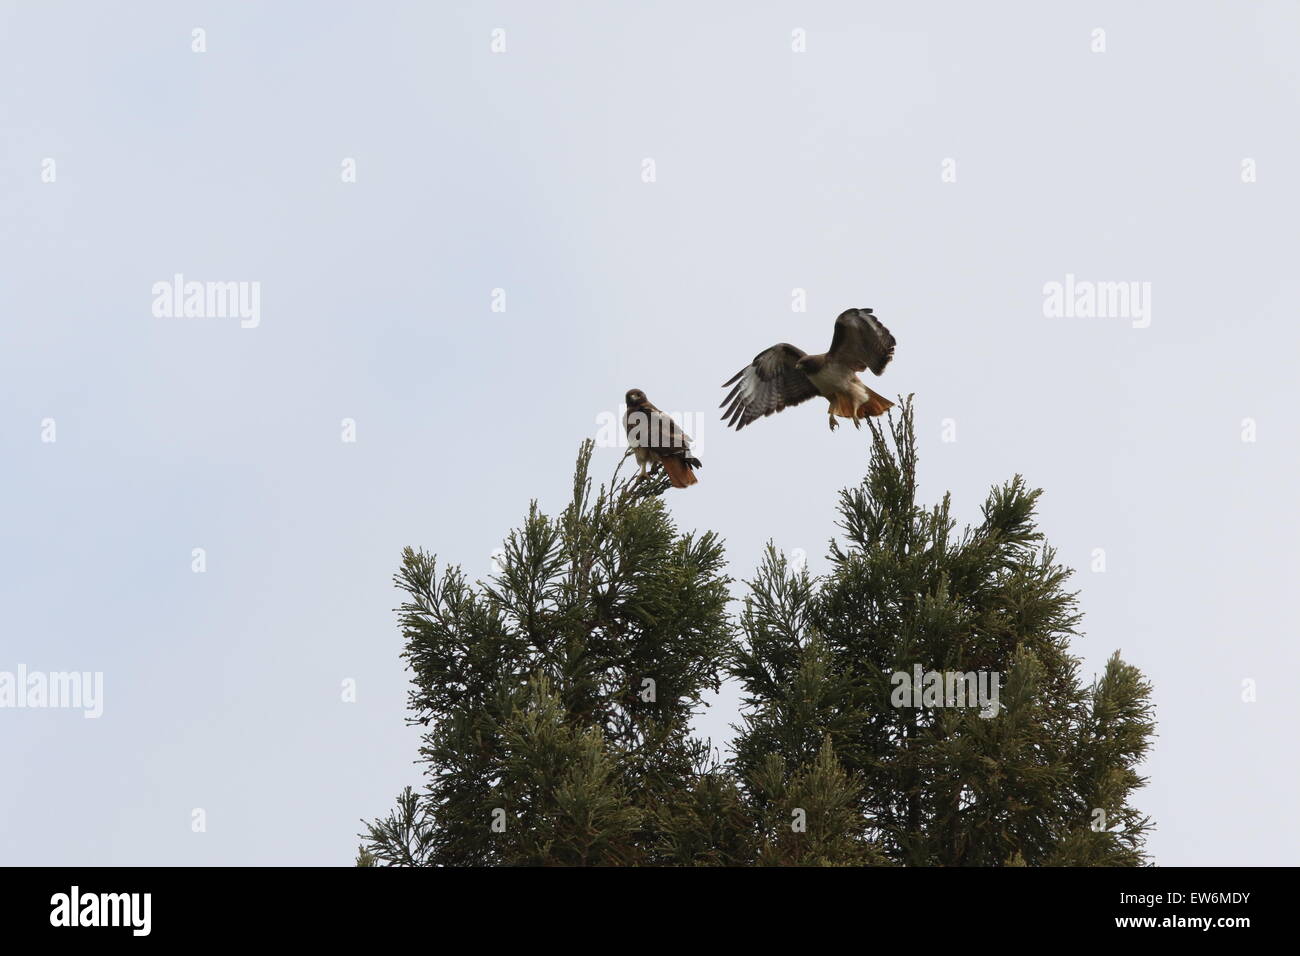 Red-tailed Hawk giovane Foto Stock